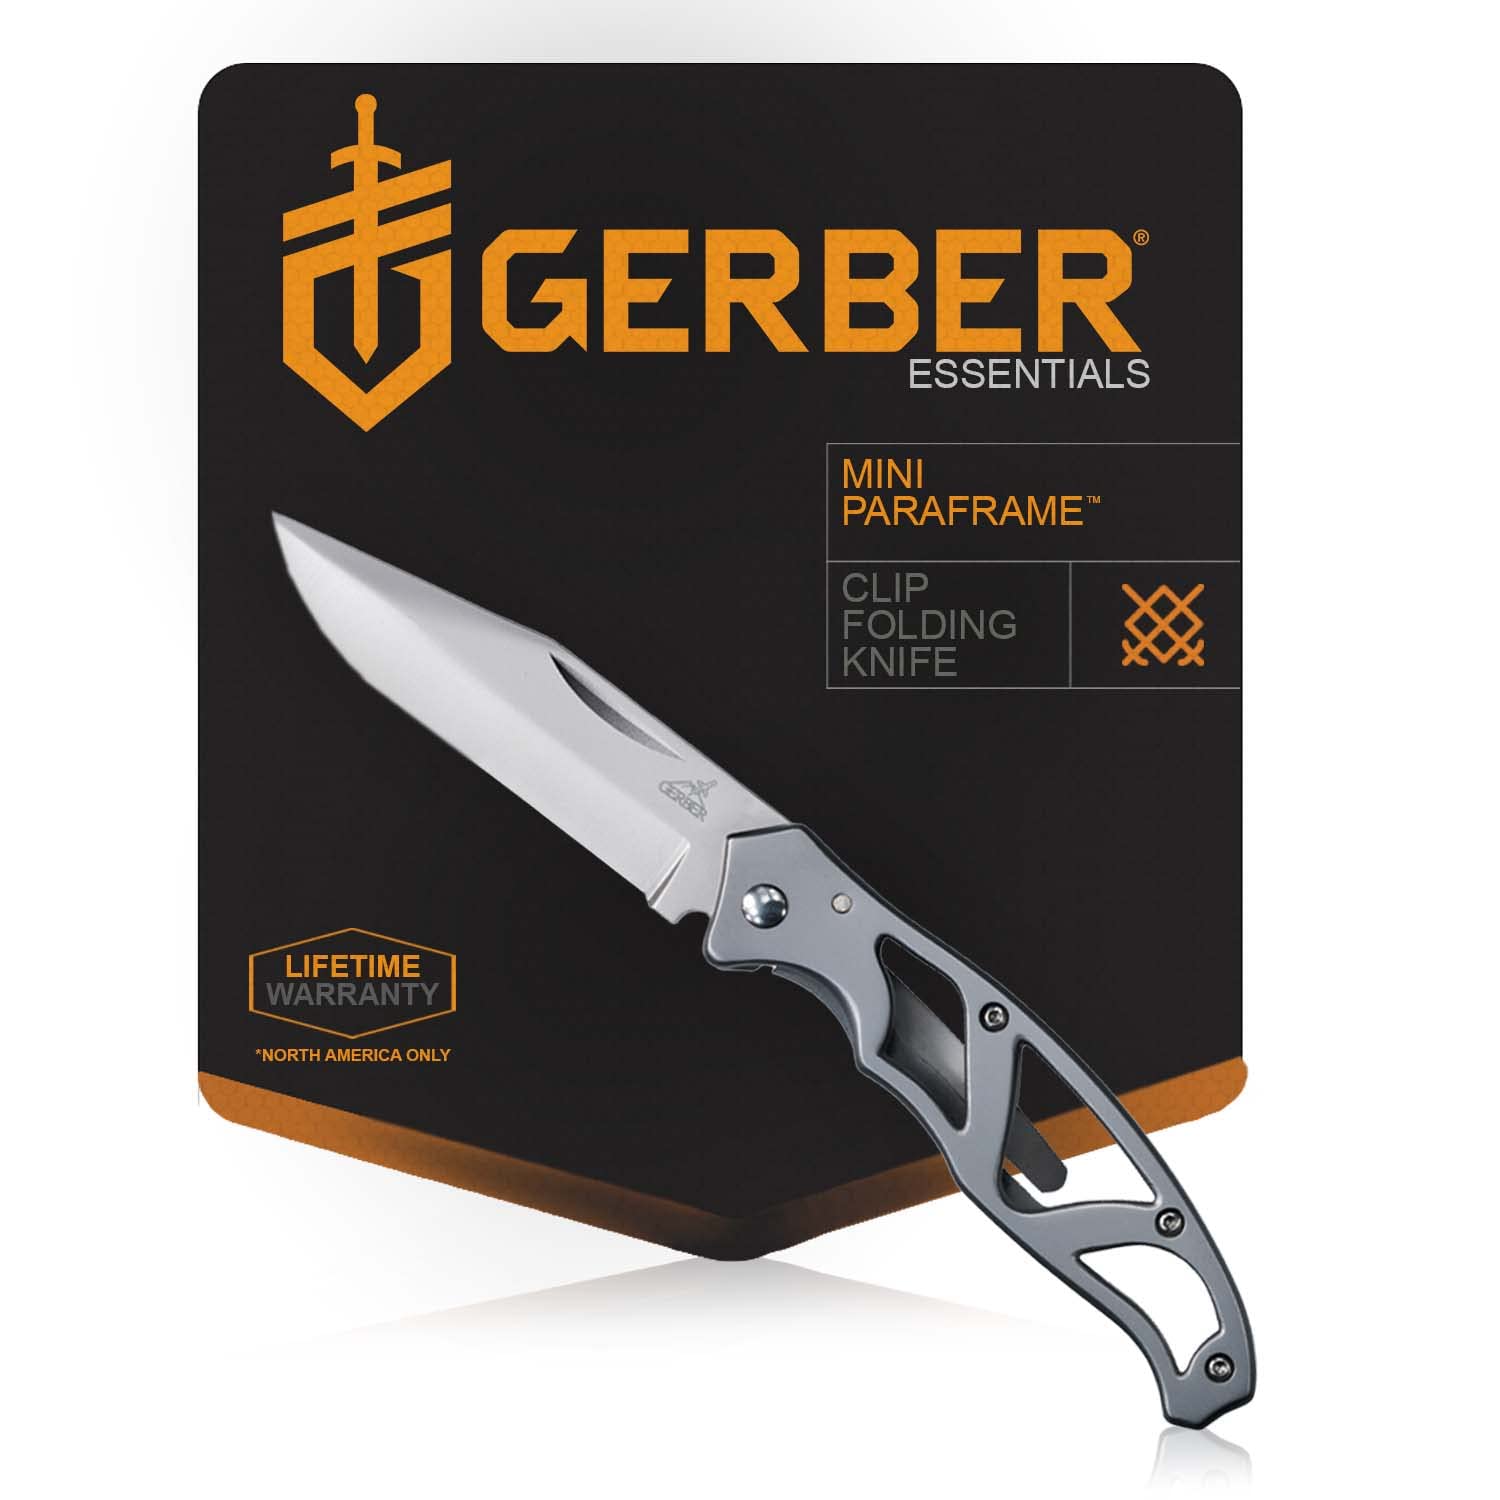 Gerber Gear Paraframe Mini Pocket Knife w/ 2.2" Fine Edge Blade (Stainless Steel) $9.94 + Free Shipping w/ Prime or on $25+